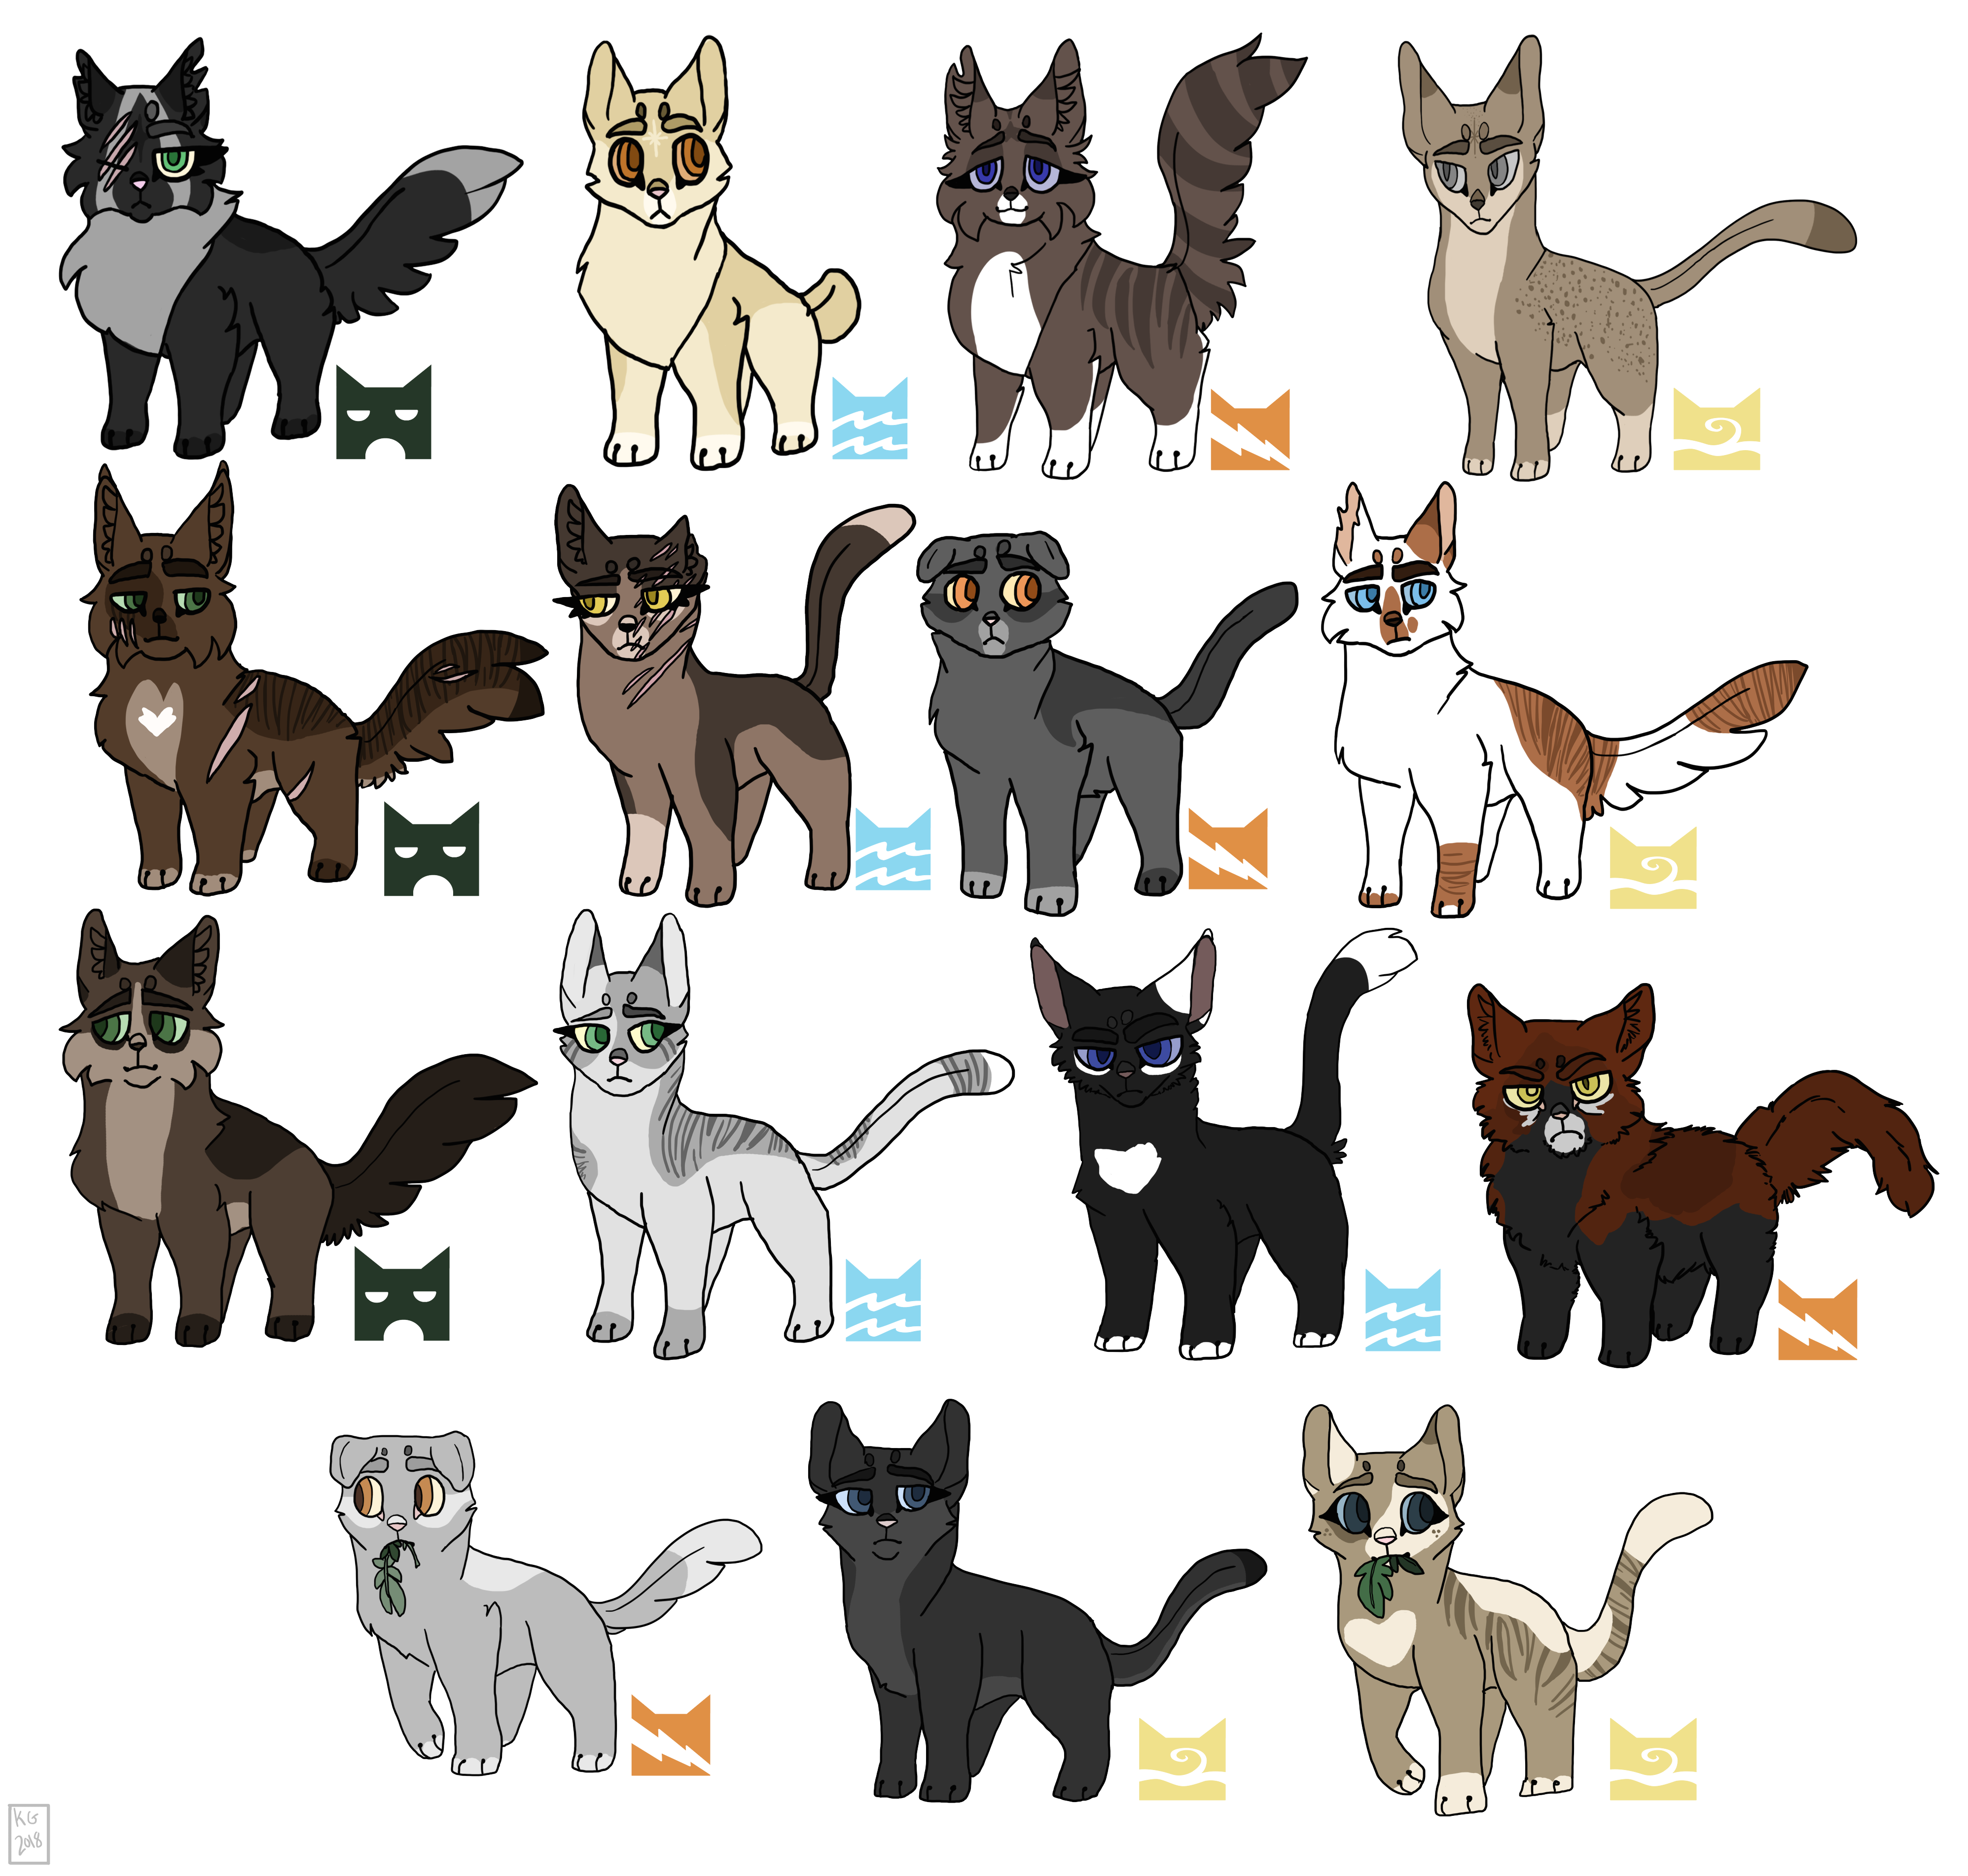 Character Reference [Warrior Cats: RS] by AutumnFoxtrot on DeviantArt